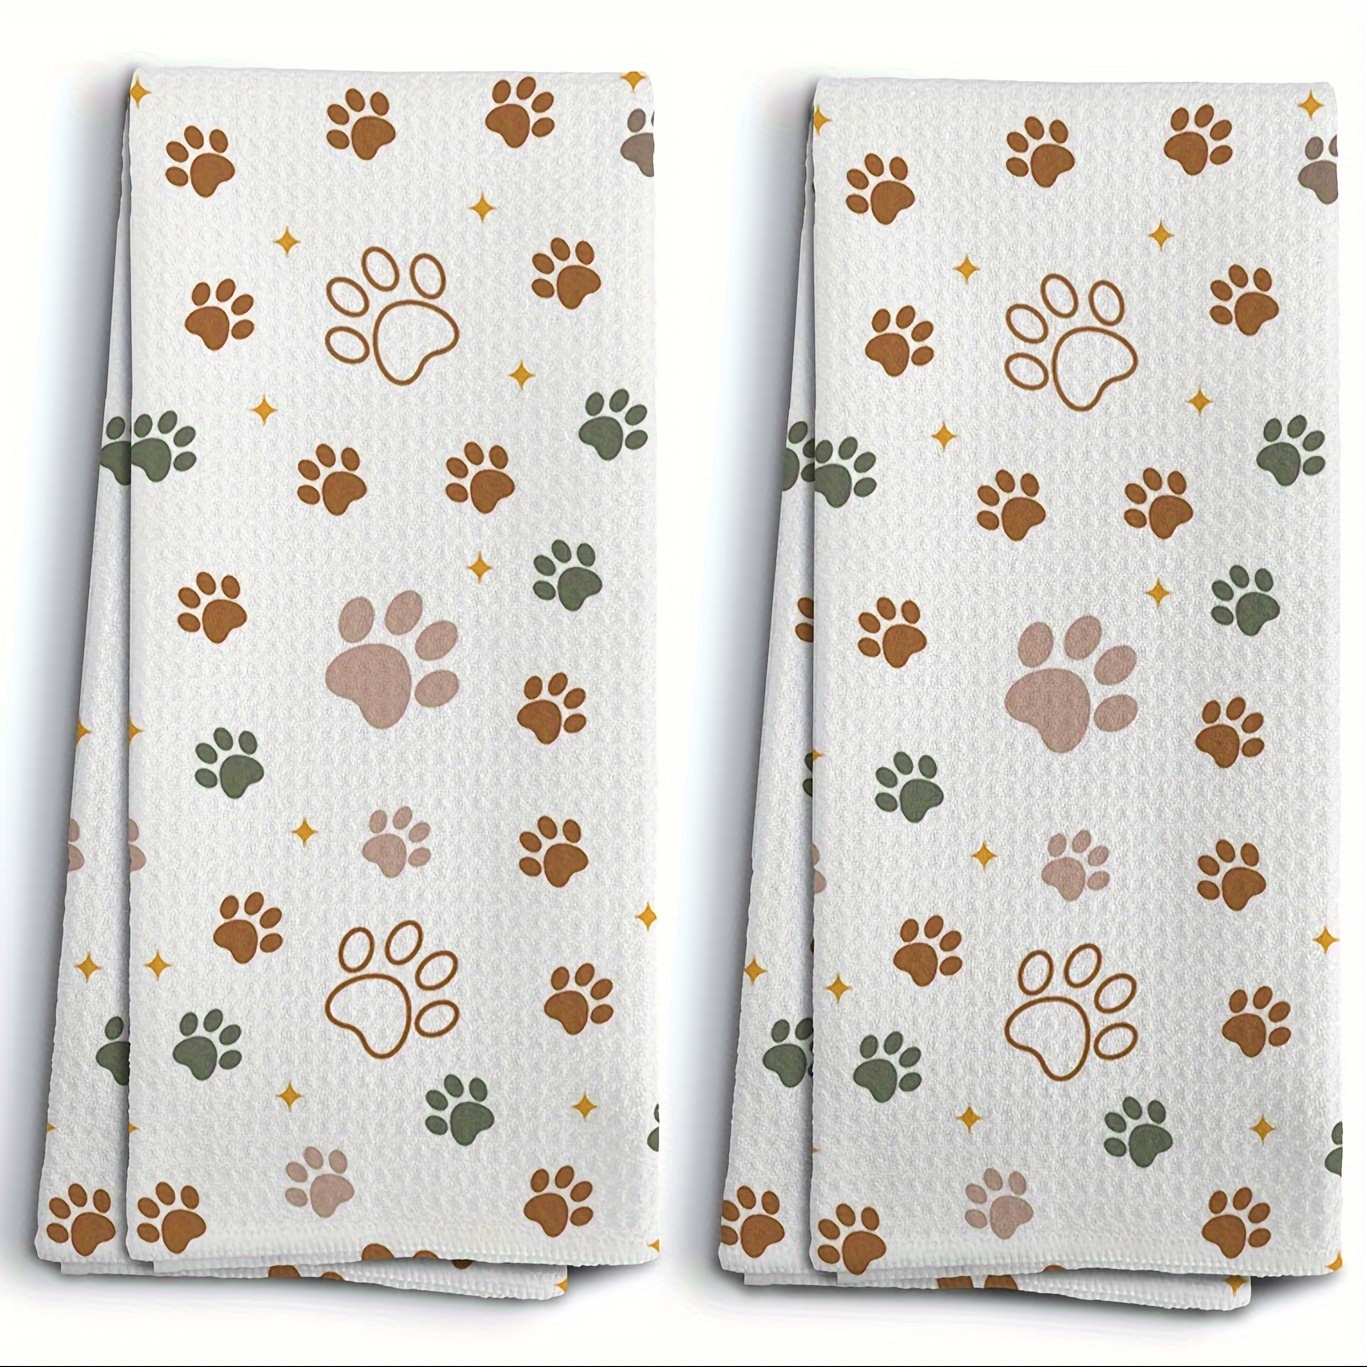 

2-pack Dog Paw Print Kitchen Towels - Super Soft, Woven Polyester Dish Towels, Modern Animal-themed Decorative Hand Towels For Kitchen, Machine Washable Oblong Dishcloths